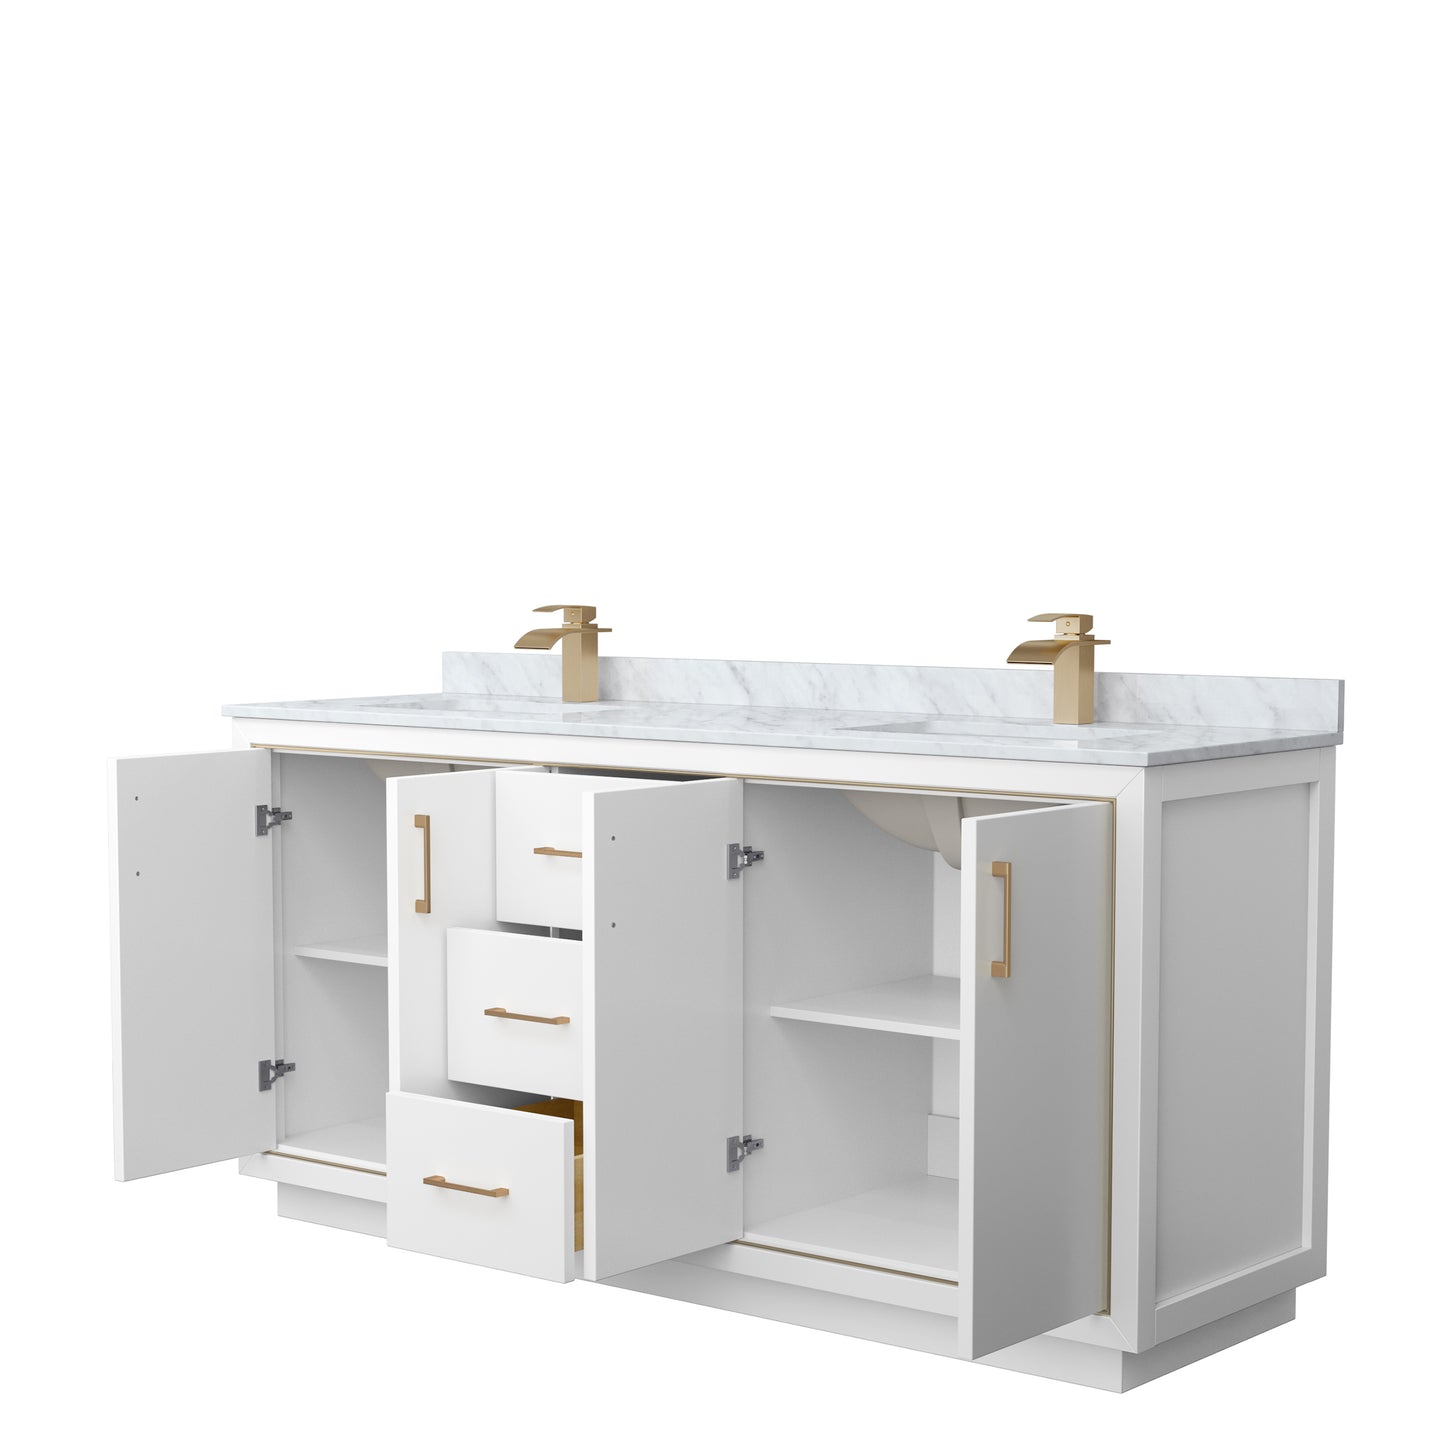 Wyndham Icon 72 Inch Double Bathroom Vanity in White with White Carrara Marble Countertop and Undermount Square Sinks in Satin Bronze Trim - Luxe Bathroom Vanities